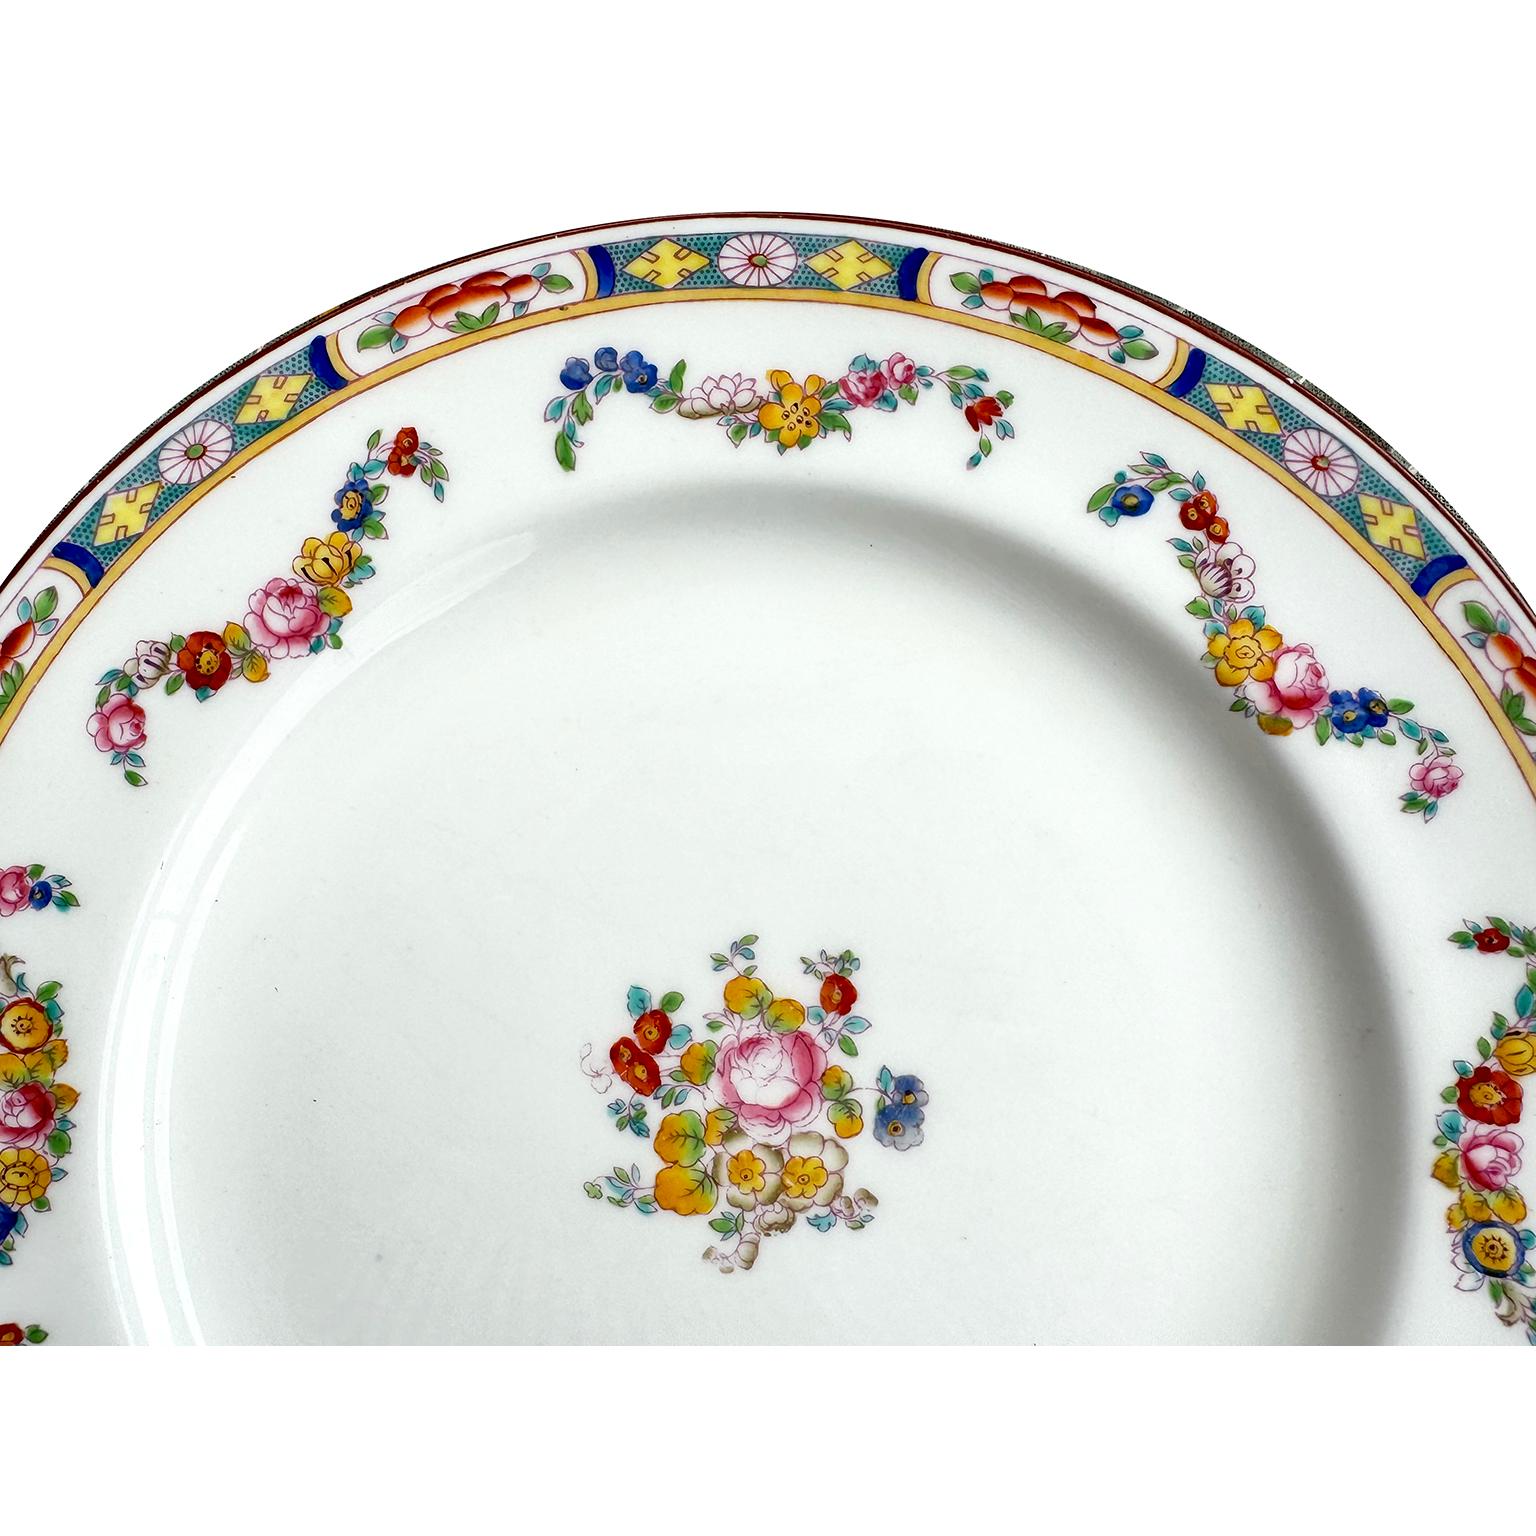 A Set of 34 English Hand-Decorated Minton Fine China Dining Plates. The beautifully vibrant color hand painted dinner plates, each with a colorful floral design, an intricate trim and swaged floral strands, centered with a floral bouquet. All